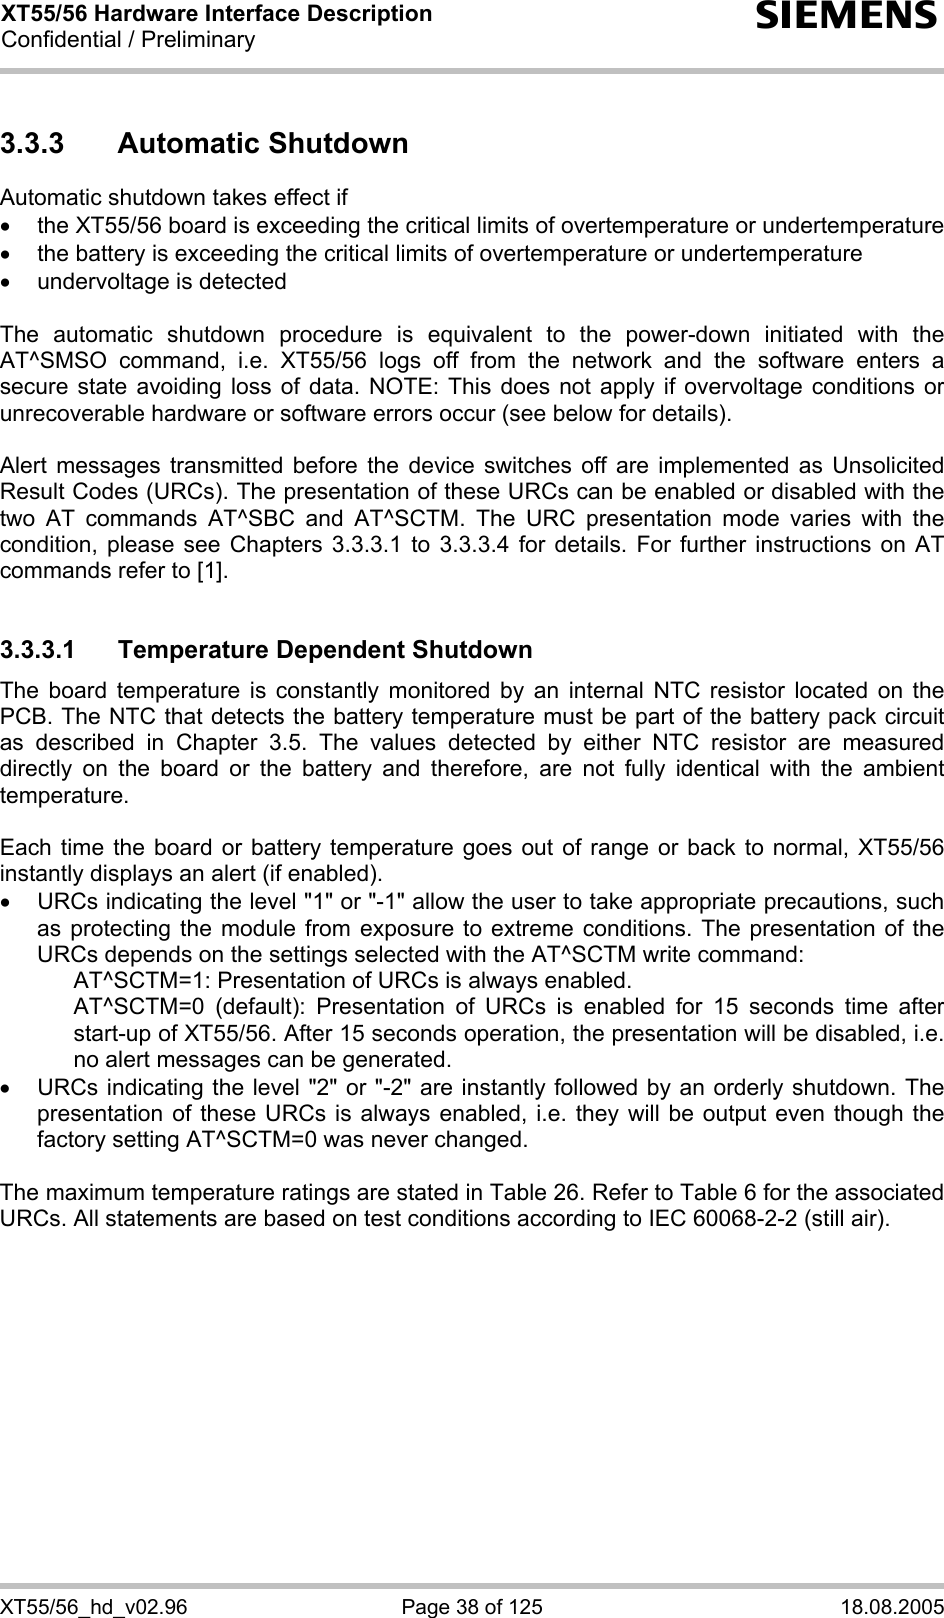 XT55/56 Hardware Interface Description Confidential / Preliminary s XT55/56_hd_v02.96  Page 38 of 125  18.08.2005 3.3.3 Automatic Shutdown Automatic shutdown takes effect if •  the XT55/56 board is exceeding the critical limits of overtemperature or undertemperature •  the battery is exceeding the critical limits of overtemperature or undertemperature •  undervoltage is detected  The automatic shutdown procedure is equivalent to the power-down initiated with the AT^SMSO command, i.e. XT55/56 logs off from the network and the software enters a secure state avoiding loss of data. NOTE: This does not apply if overvoltage conditions or unrecoverable hardware or software errors occur (see below for details).  Alert messages transmitted before the device switches off are implemented as Unsolicited Result Codes (URCs). The presentation of these URCs can be enabled or disabled with the two AT commands AT^SBC and AT^SCTM. The URC presentation mode varies with the condition, please see Chapters 3.3.3.1 to 3.3.3.4 for details. For further instructions on AT commands refer to [1].  3.3.3.1  Temperature Dependent Shutdown The board temperature is constantly monitored by an internal NTC resistor located on the PCB. The NTC that detects the battery temperature must be part of the battery pack circuit as described in Chapter 3.5. The values detected by either NTC resistor are measured directly on the board or the battery and therefore, are not fully identical with the ambient temperature.   Each time the board or battery temperature goes out of range or back to normal, XT55/56 instantly displays an alert (if enabled). •  URCs indicating the level &quot;1&quot; or &quot;-1&quot; allow the user to take appropriate precautions, such as protecting the module from exposure to extreme conditions. The presentation of the URCs depends on the settings selected with the AT^SCTM write command:     AT^SCTM=1: Presentation of URCs is always enabled.      AT^SCTM=0 (default): Presentation of URCs is enabled for 15 seconds time after start-up of XT55/56. After 15 seconds operation, the presentation will be disabled, i.e. no alert messages can be generated.  •  URCs indicating the level &quot;2&quot; or &quot;-2&quot; are instantly followed by an orderly shutdown. The presentation of these URCs is always enabled, i.e. they will be output even though the factory setting AT^SCTM=0 was never changed.  The maximum temperature ratings are stated in Table 26. Refer to Table 6 for the associated URCs. All statements are based on test conditions according to IEC 60068-2-2 (still air).  